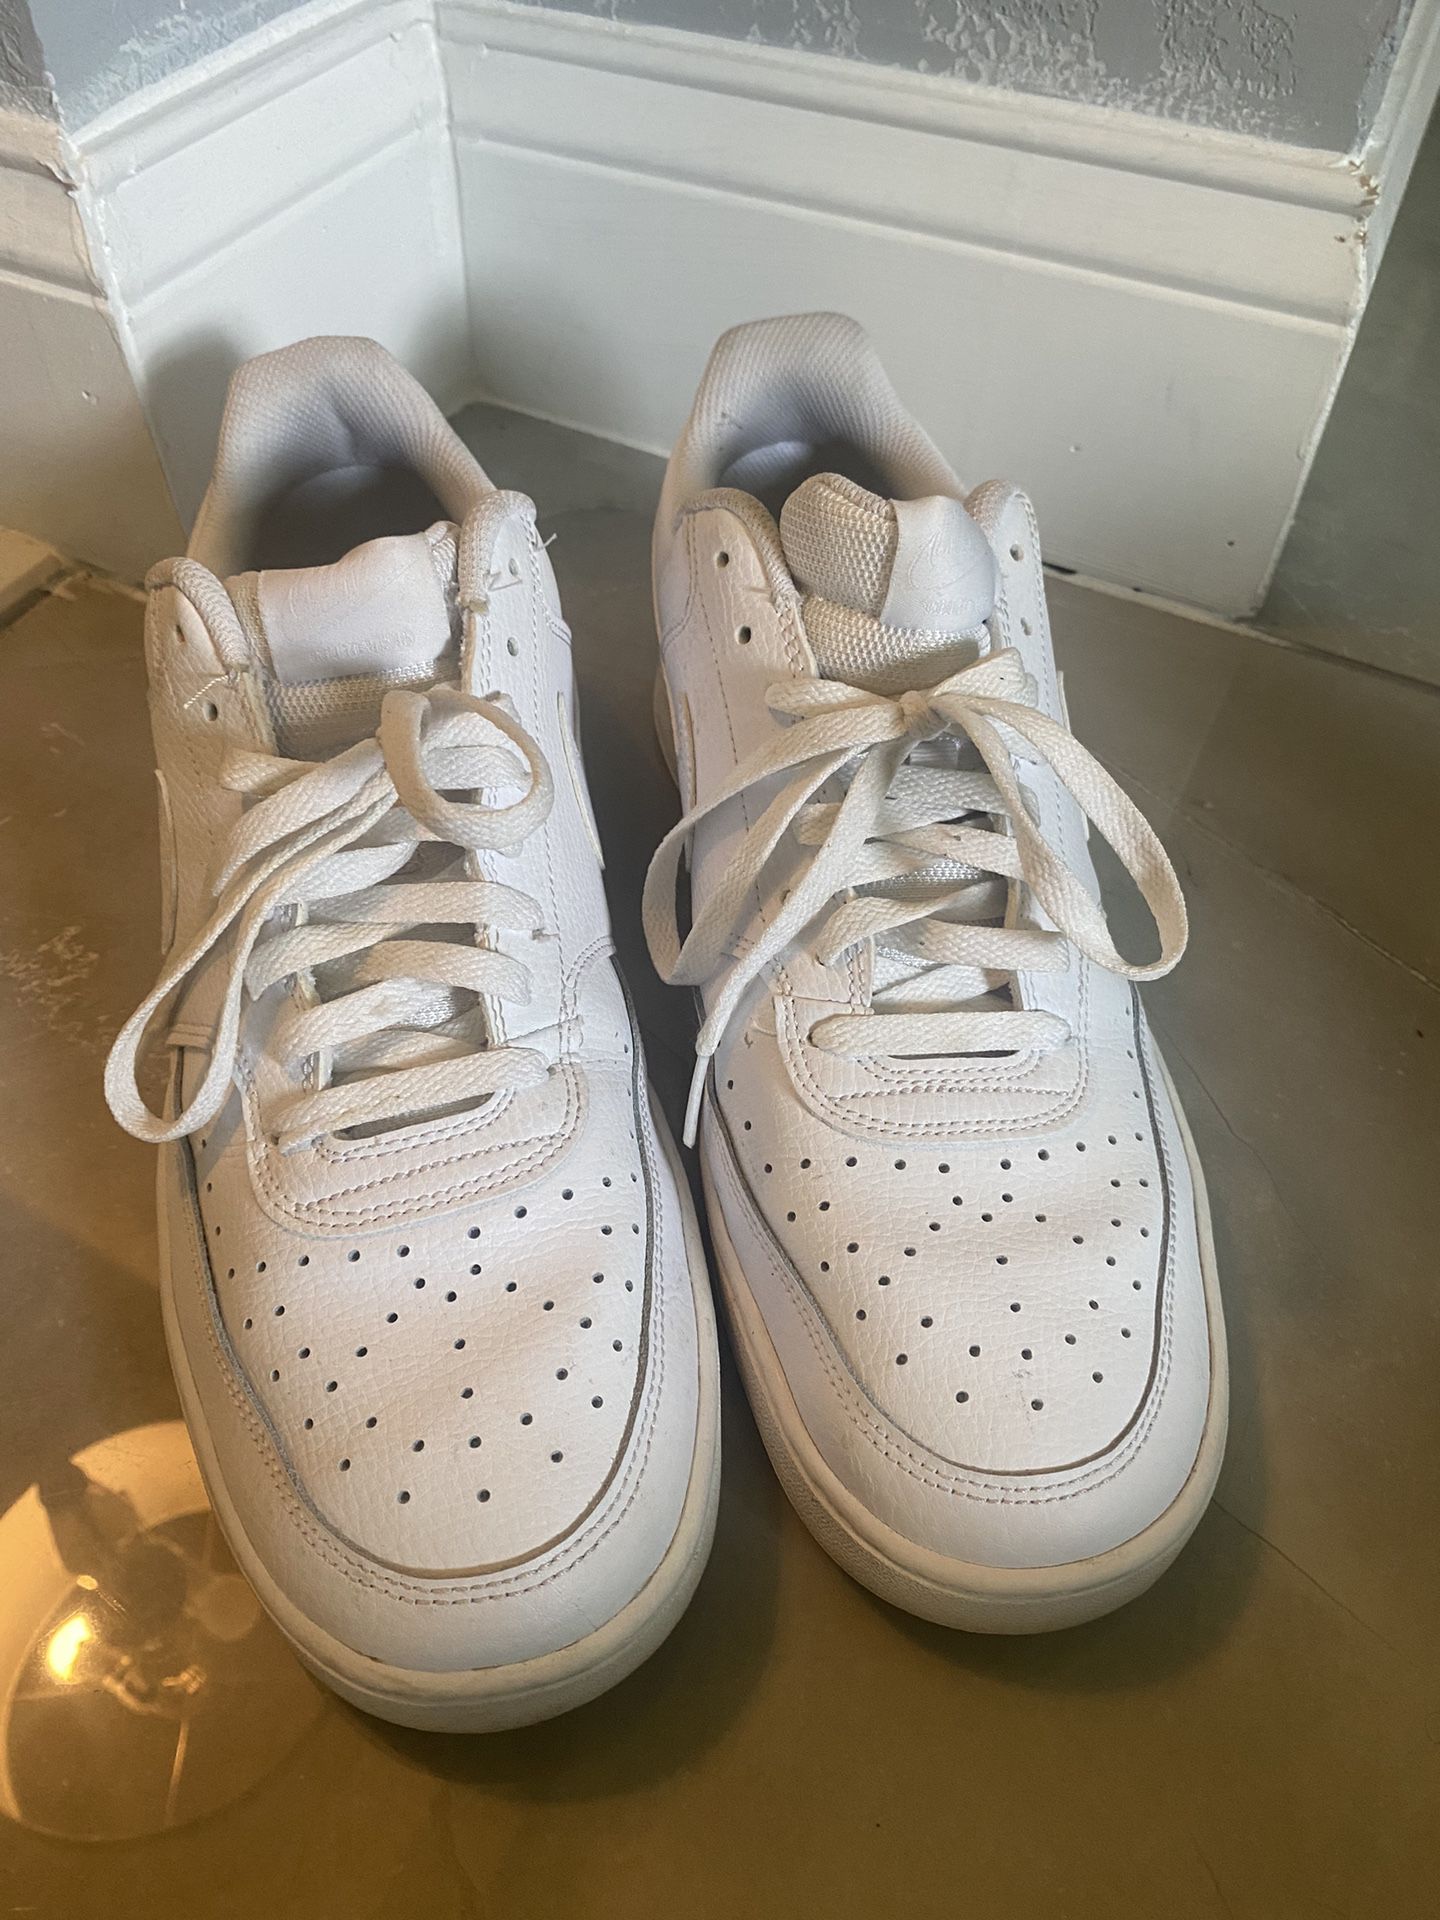 NIKE - AIR FORCE 1 07 LV8 WHITE/BLACK for Sale in Brockton, MA